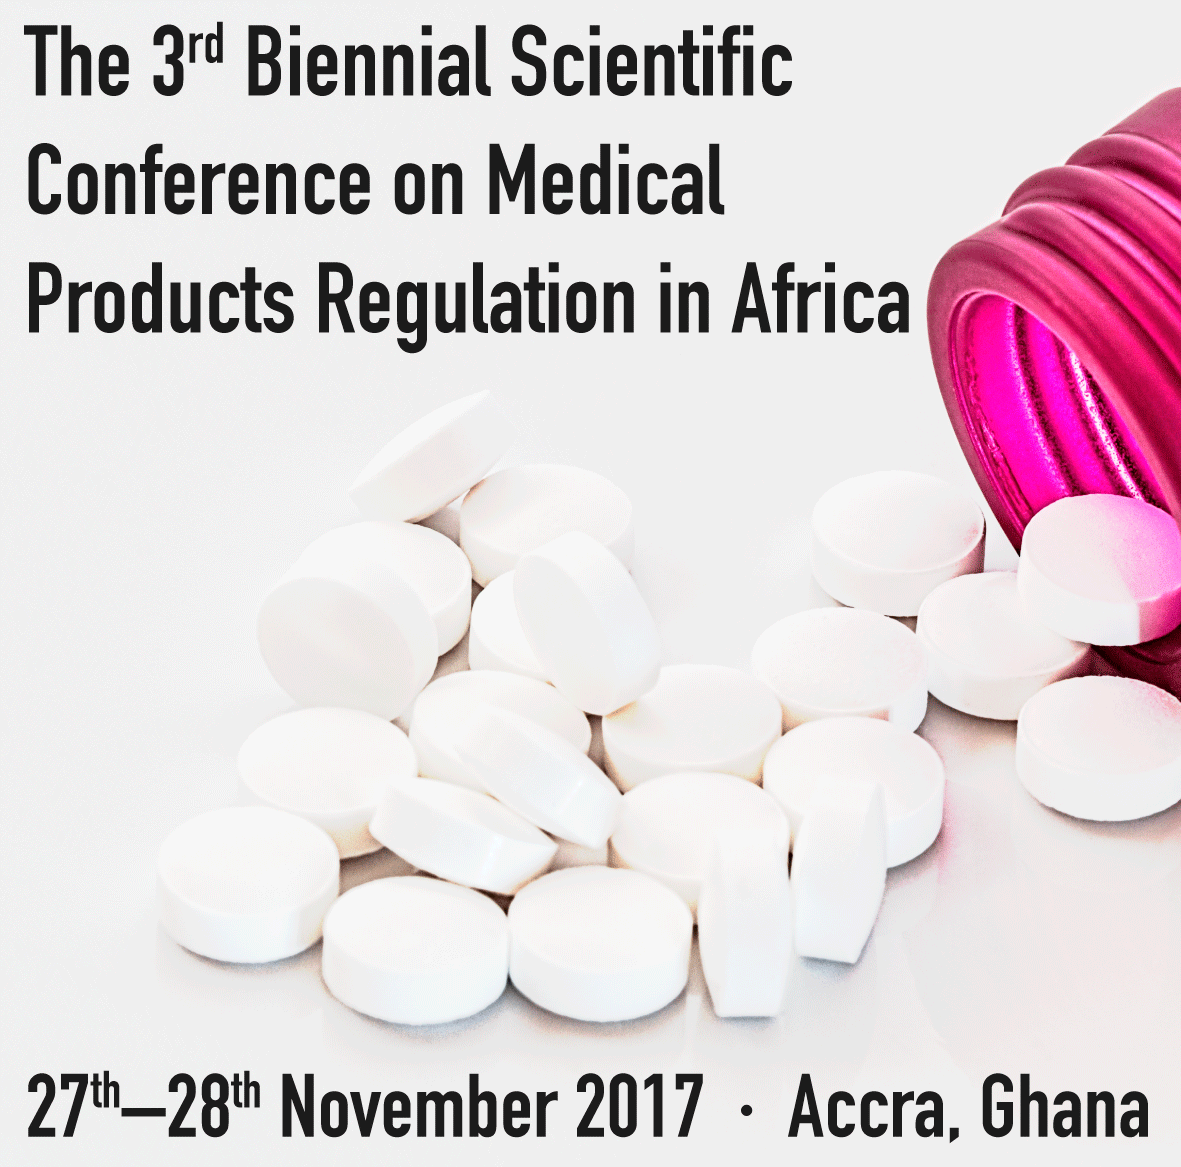 3rd Biennial Scientific Conference on Medical Products Regulation in Africa